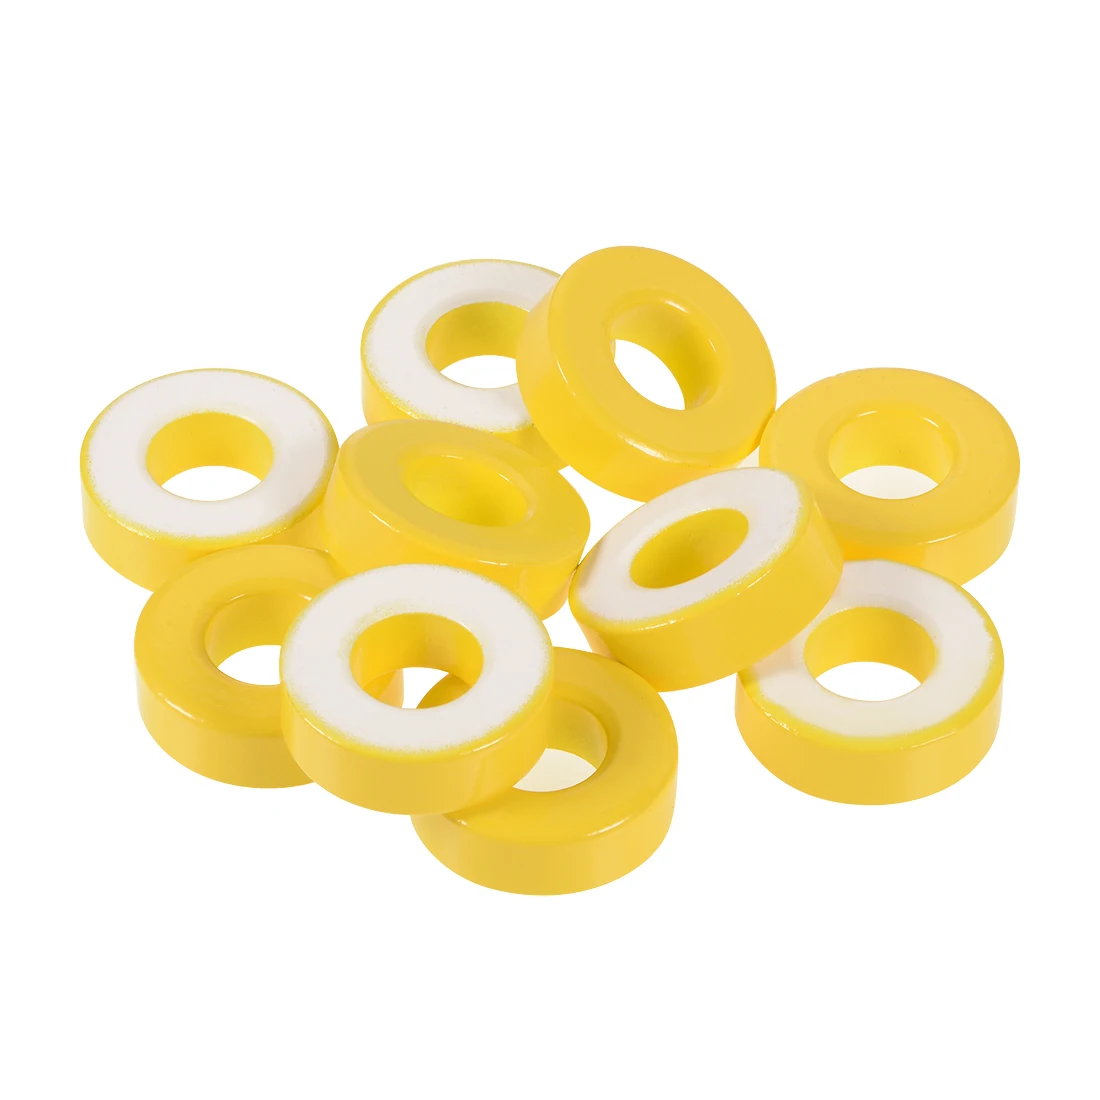 

10pcs 16x33.6x11.3mm Ferrite Ring Iron Powder Toroid Cores Yellow White Inductor Ferrite Rings for Power Transformers Inductors